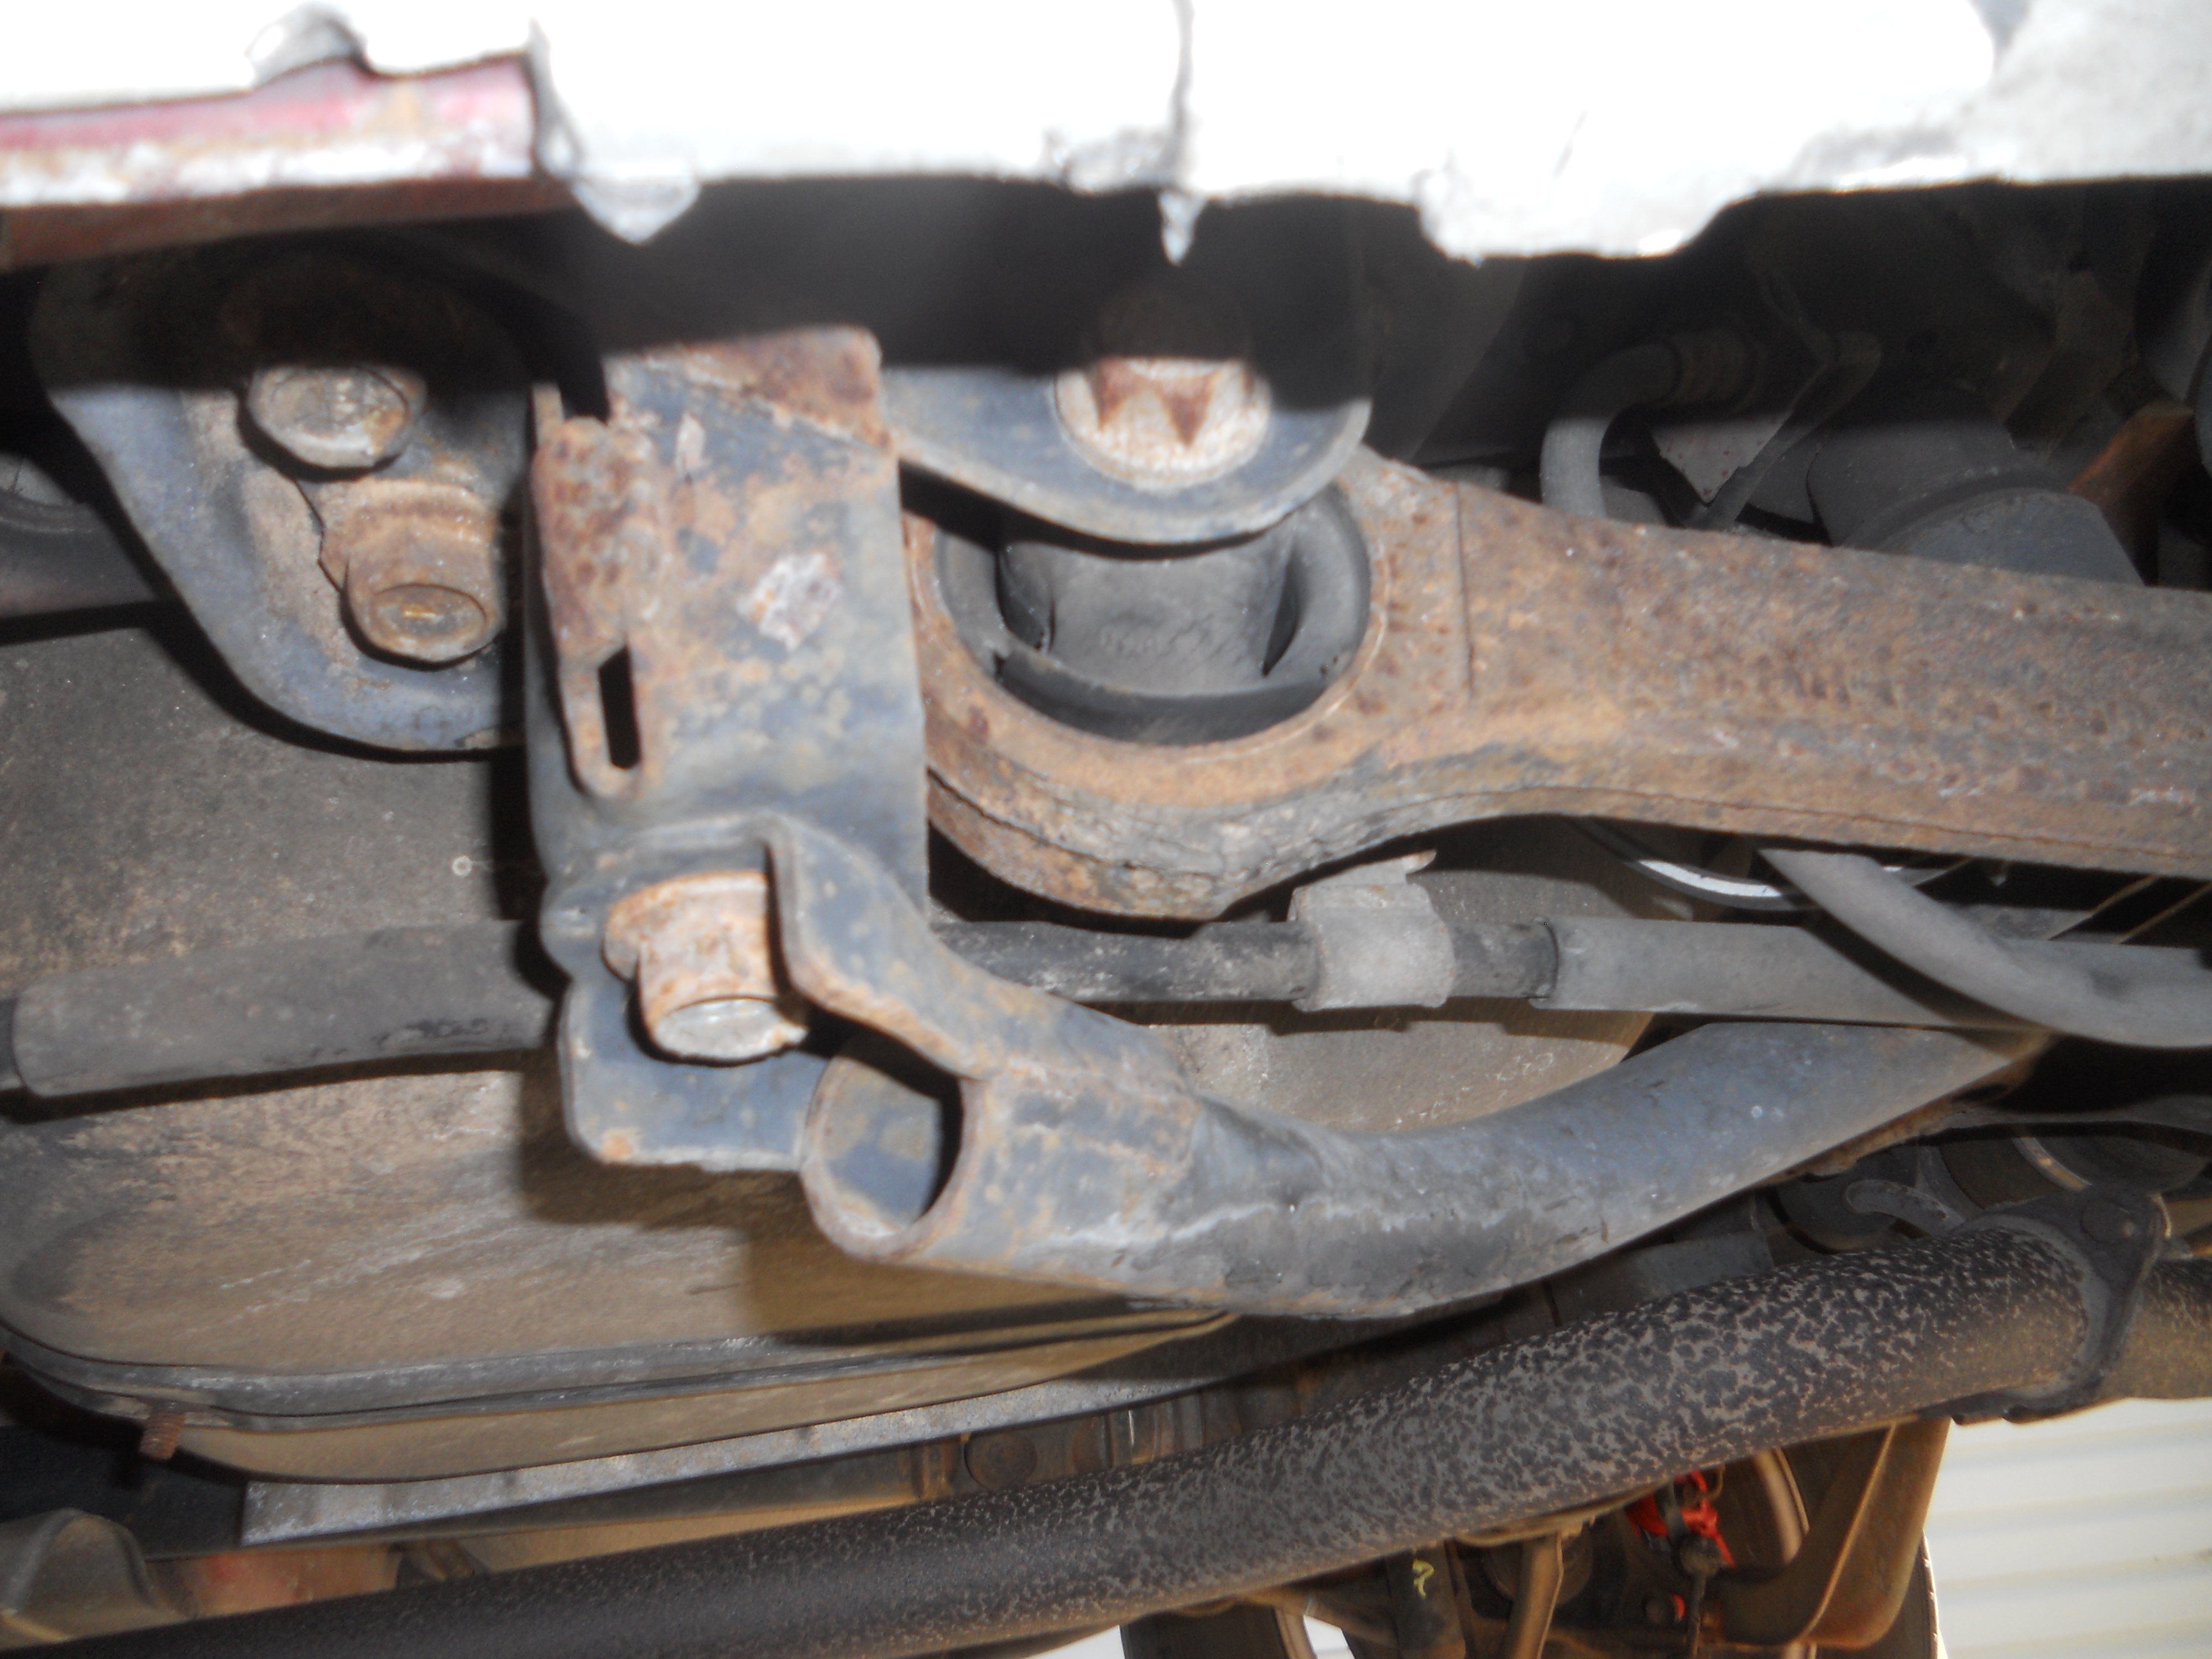 separated bushing - slipped to one side